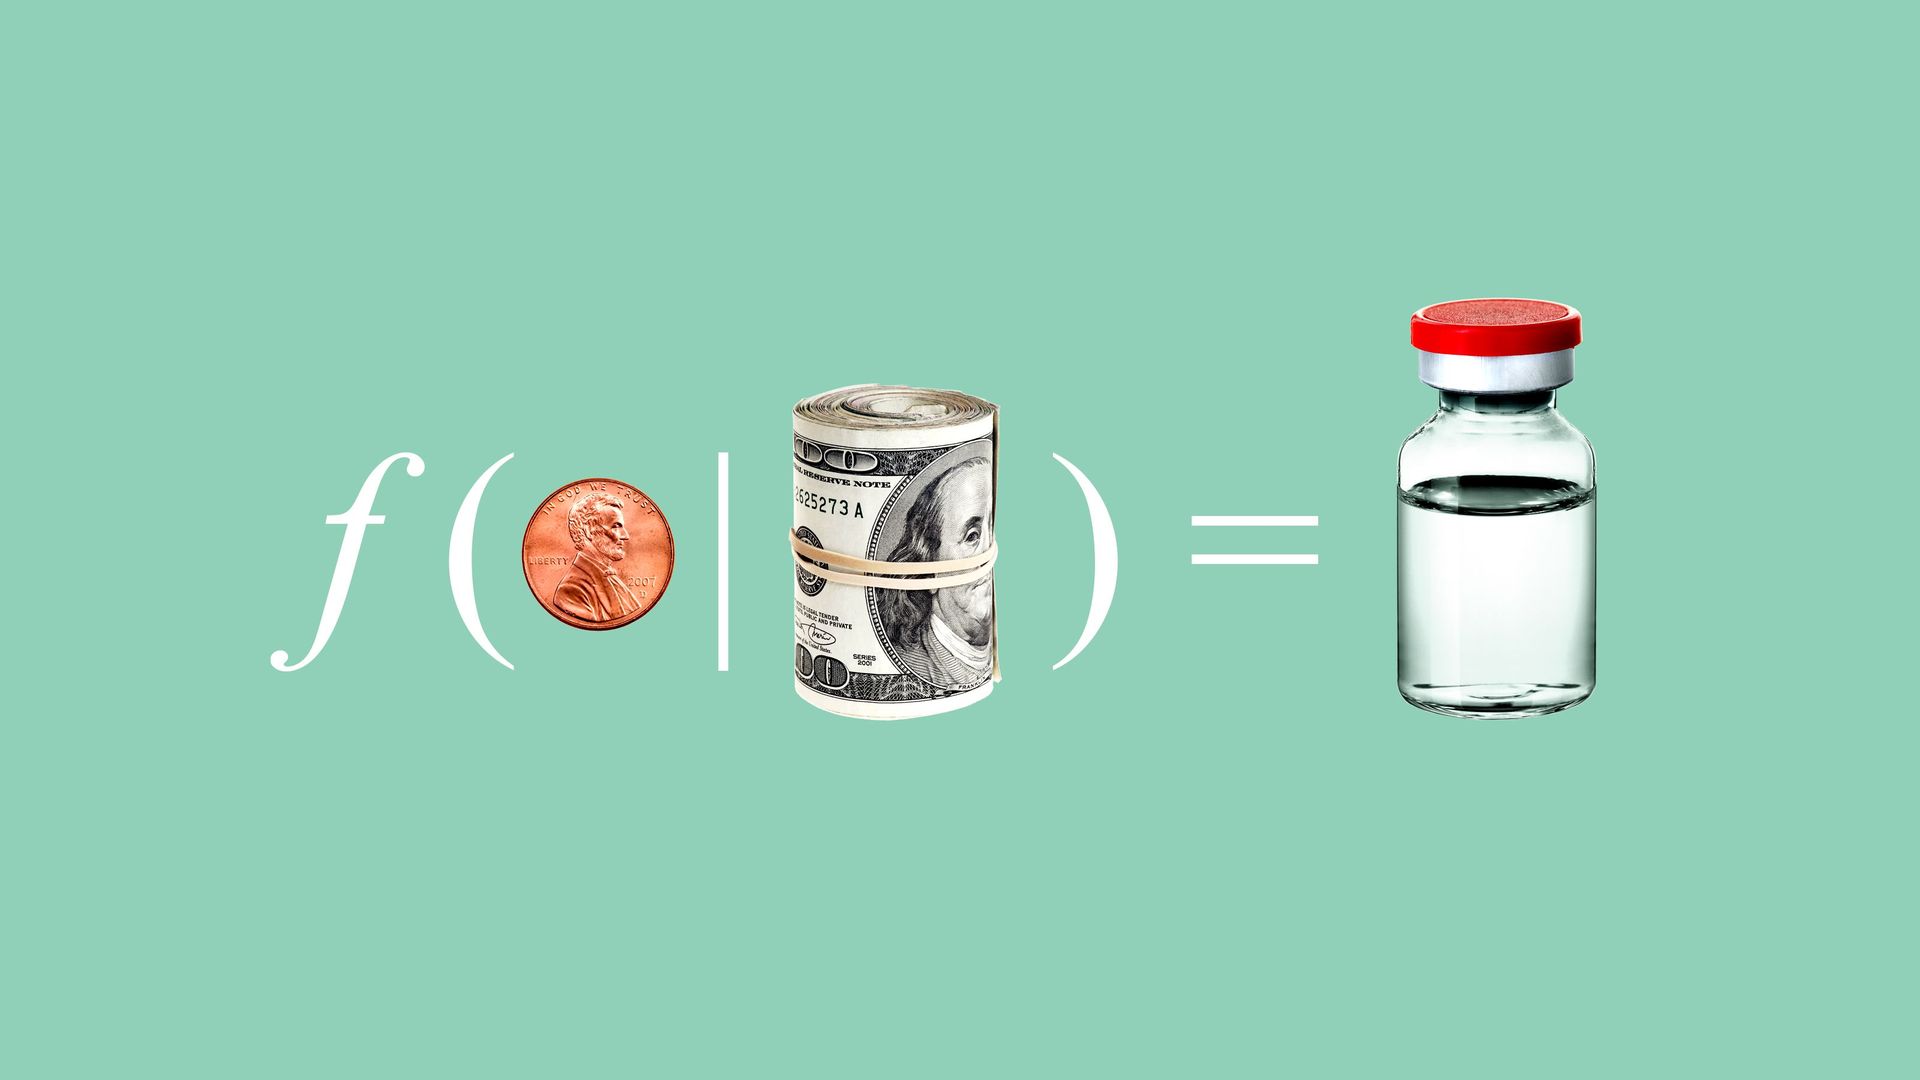 Illustration of a math formula showing money leads to prescription drugs